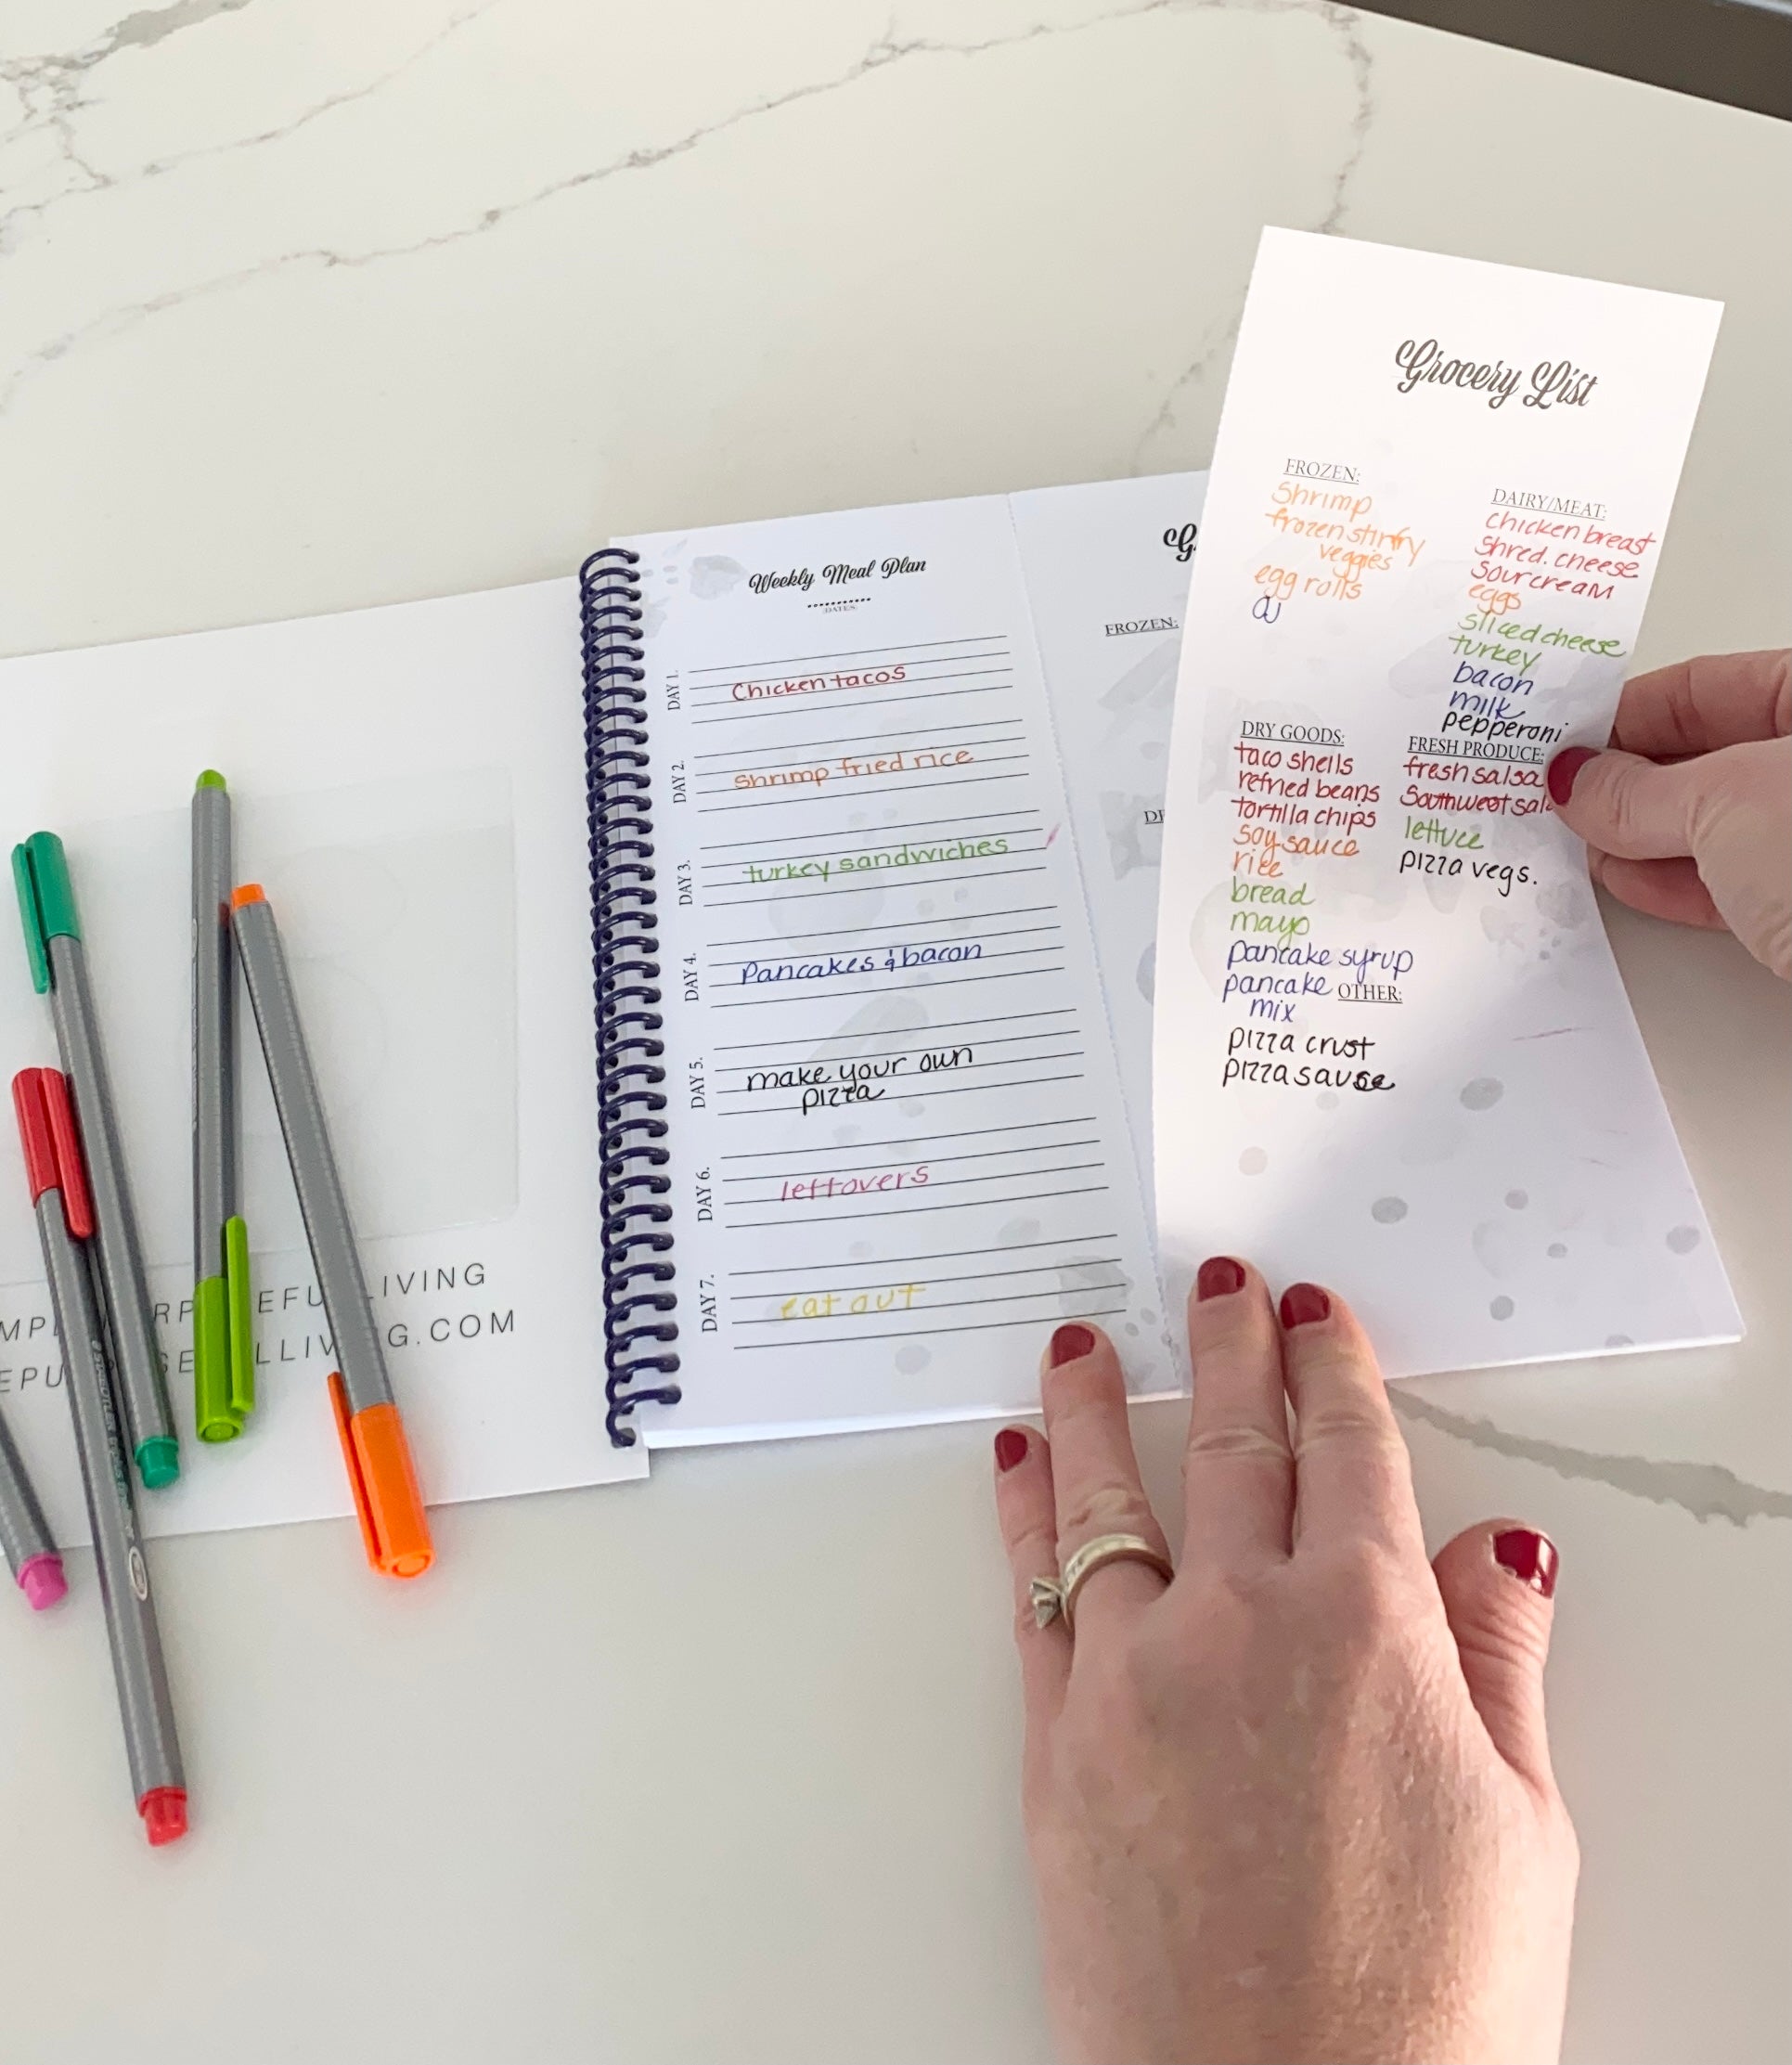 Best Selling 52 Week Meal planner with grocery list in spiral bound notebook by Simple Purposeful Living.